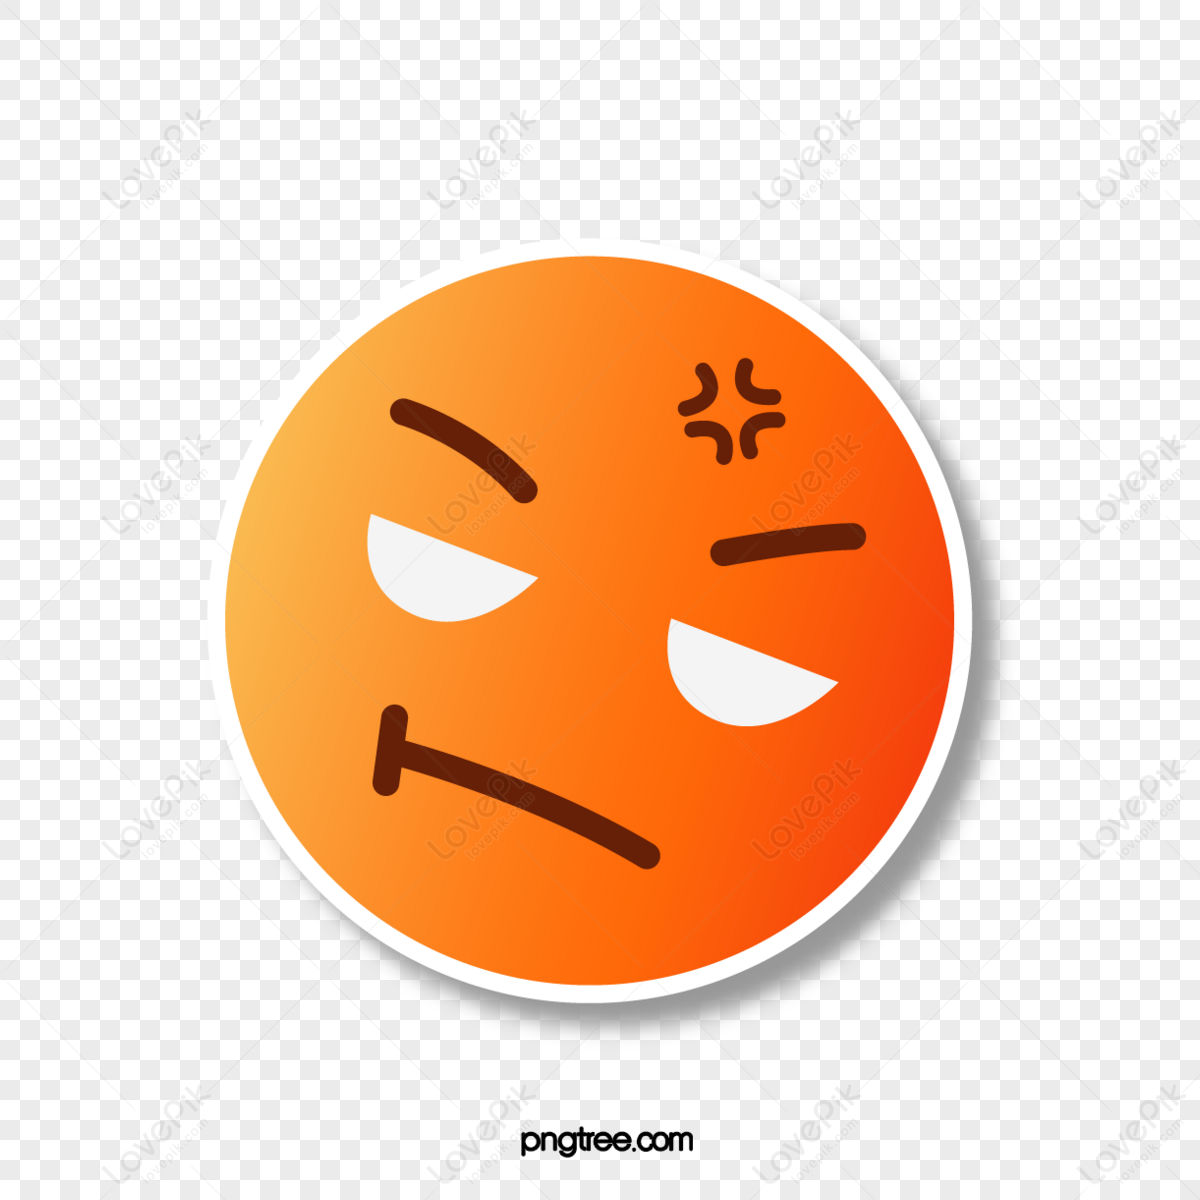 Smiley Face, Emoji, Emoticon, Sticker, Screaming, Fear, Smirk, Sadness  transparent background PNG clipart